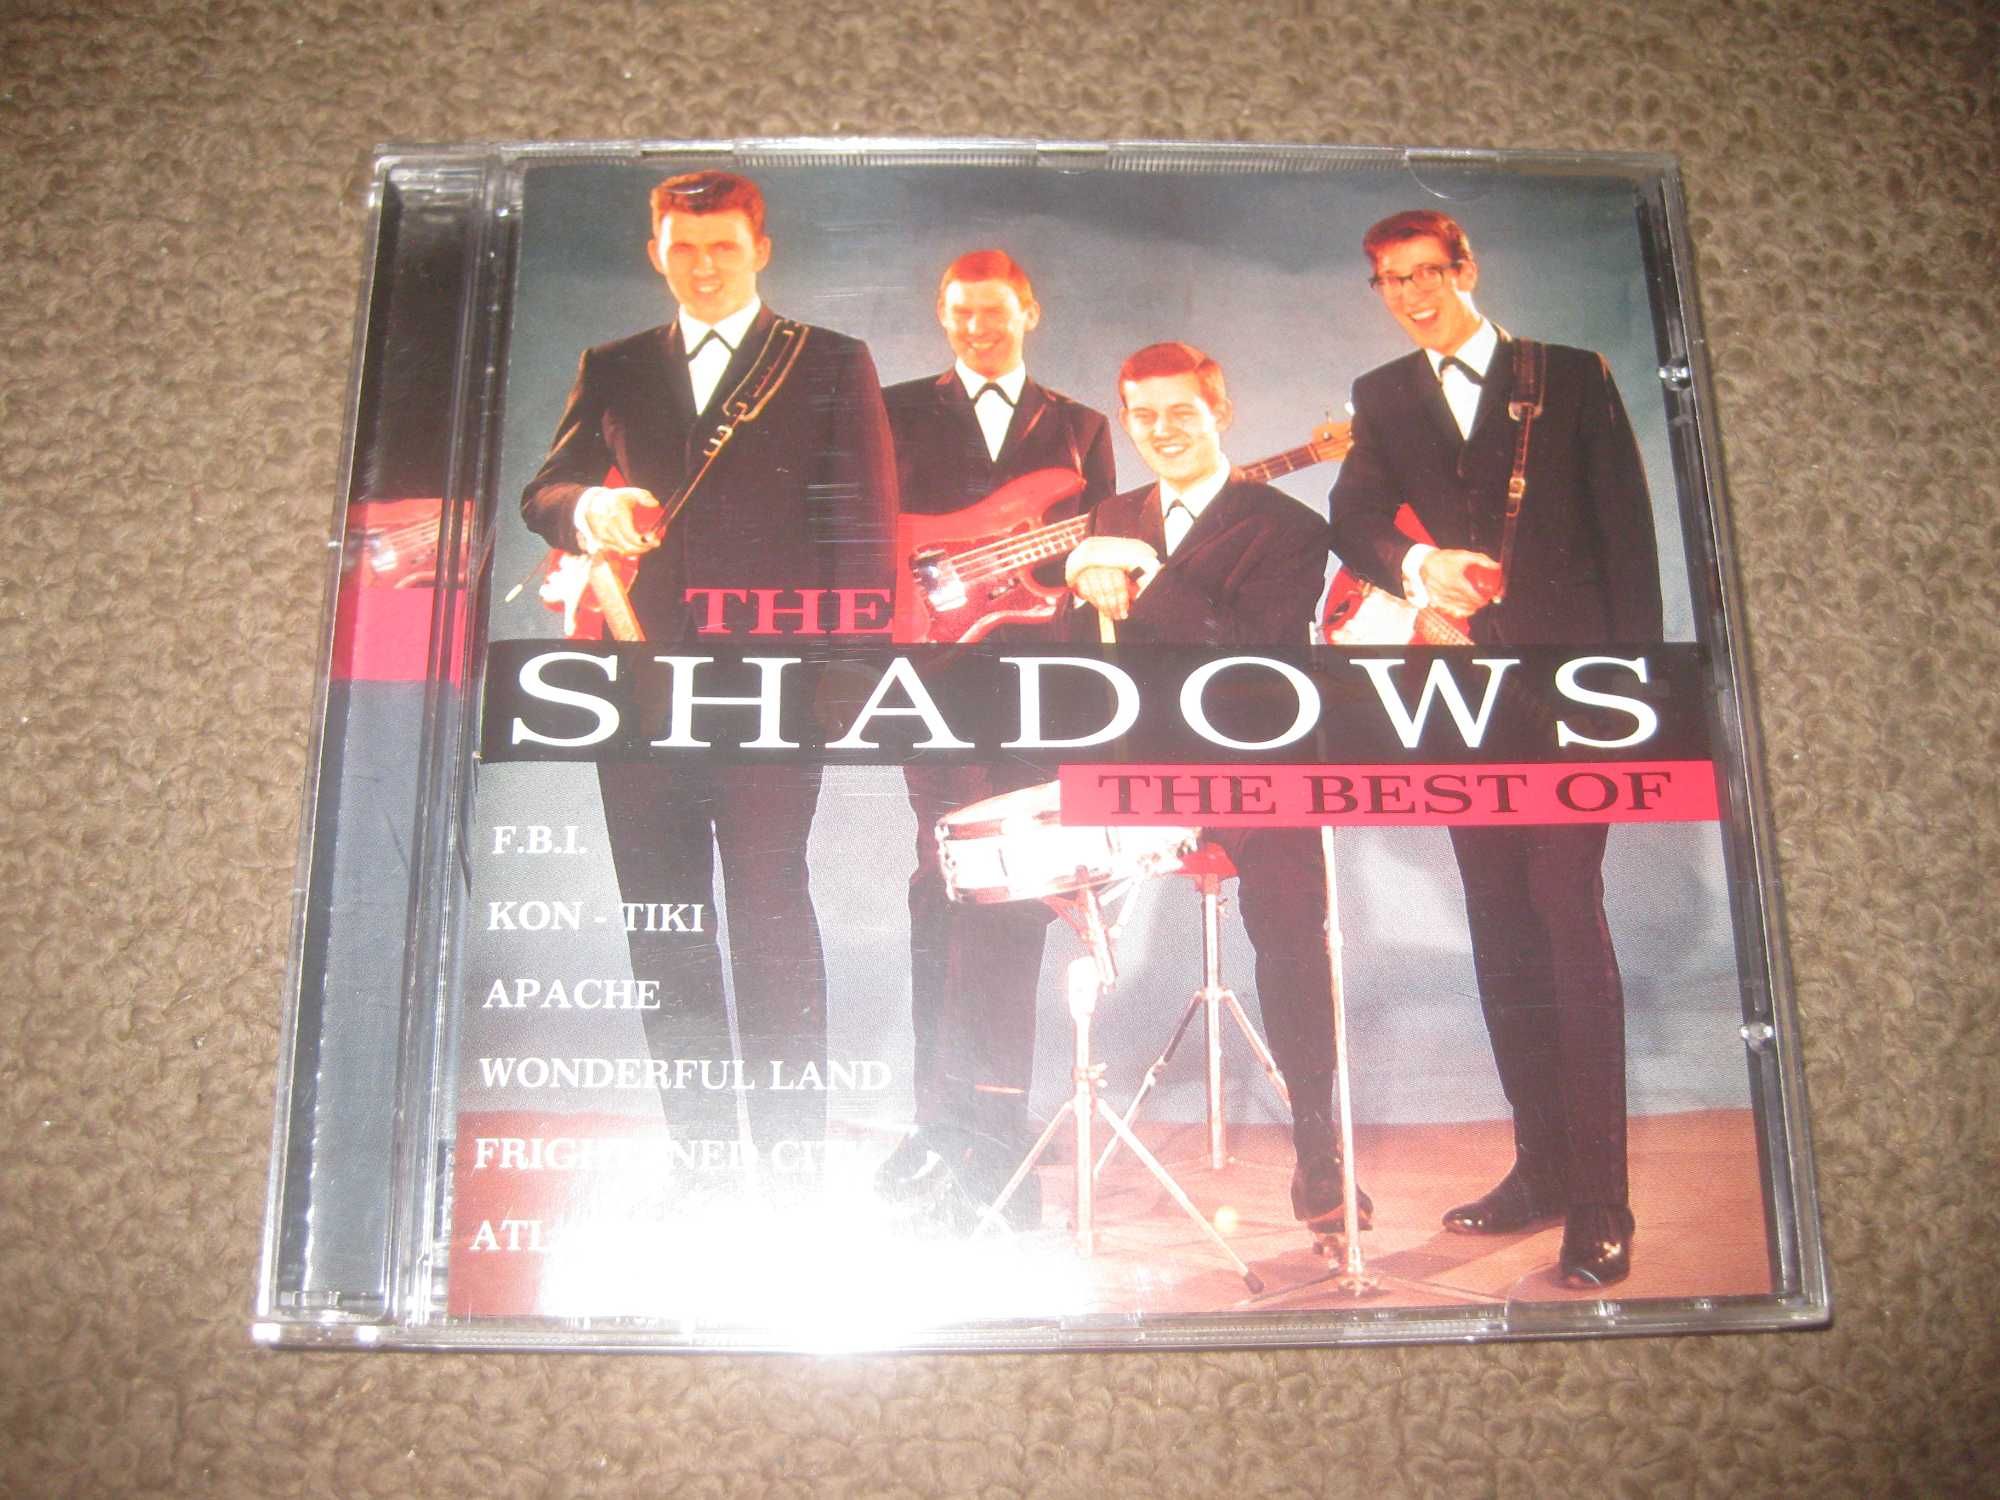 CD dos The Shadows "The Best Of"